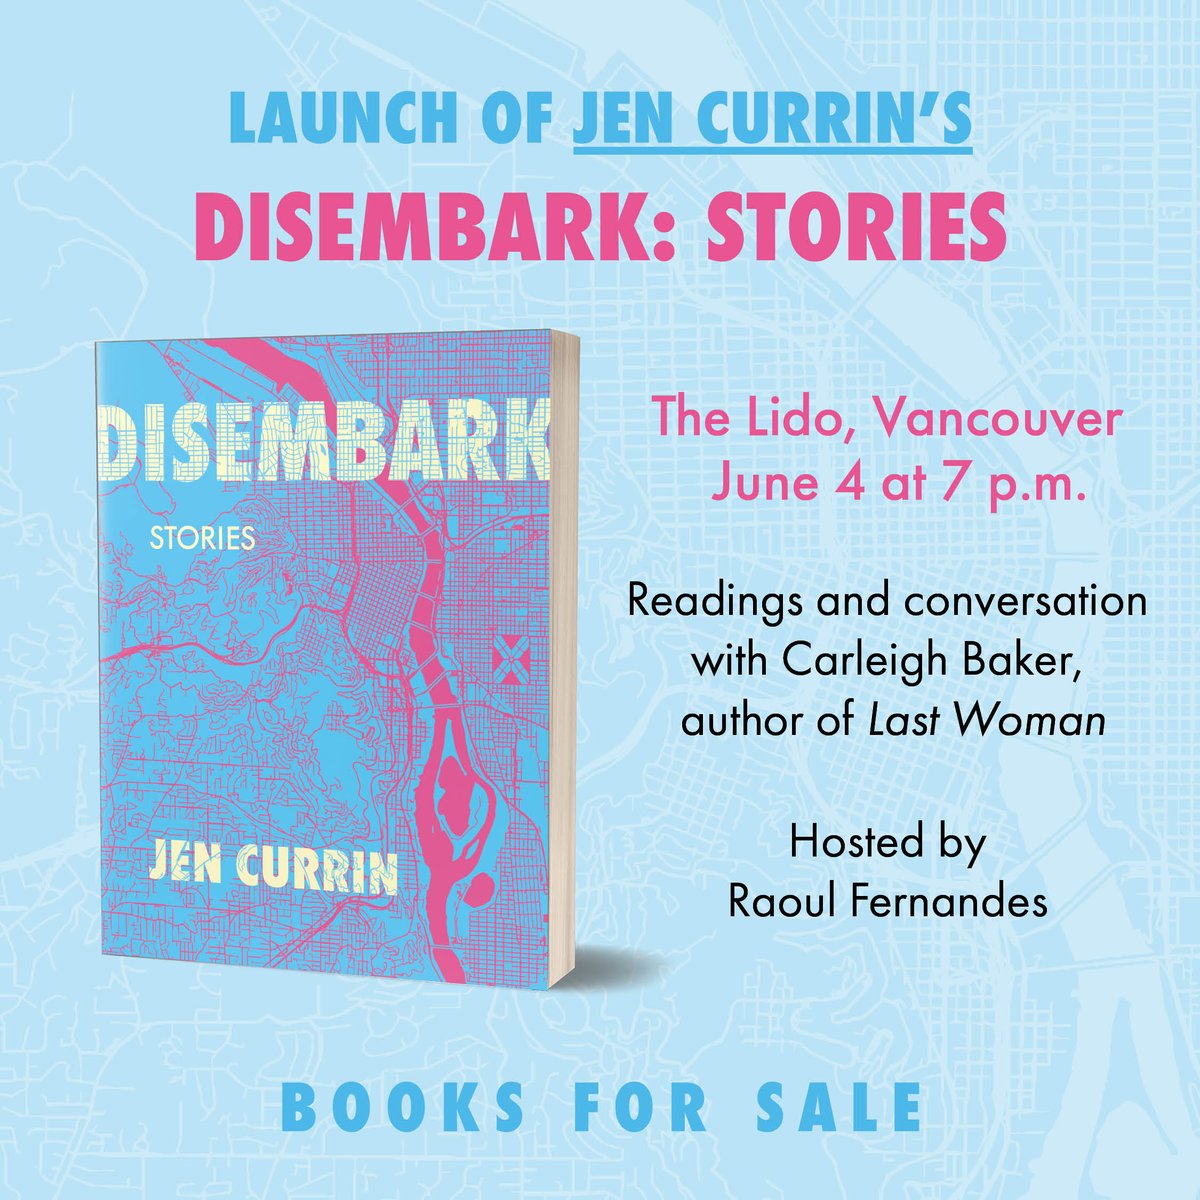 I'm putting my hosting hat on again for the launch of my dear friend Jen Currin's fresh new book of stories DISEMBARK. Also the amazing Carleigh Baker @wanlittlehusk will read from her new collection! Come out!